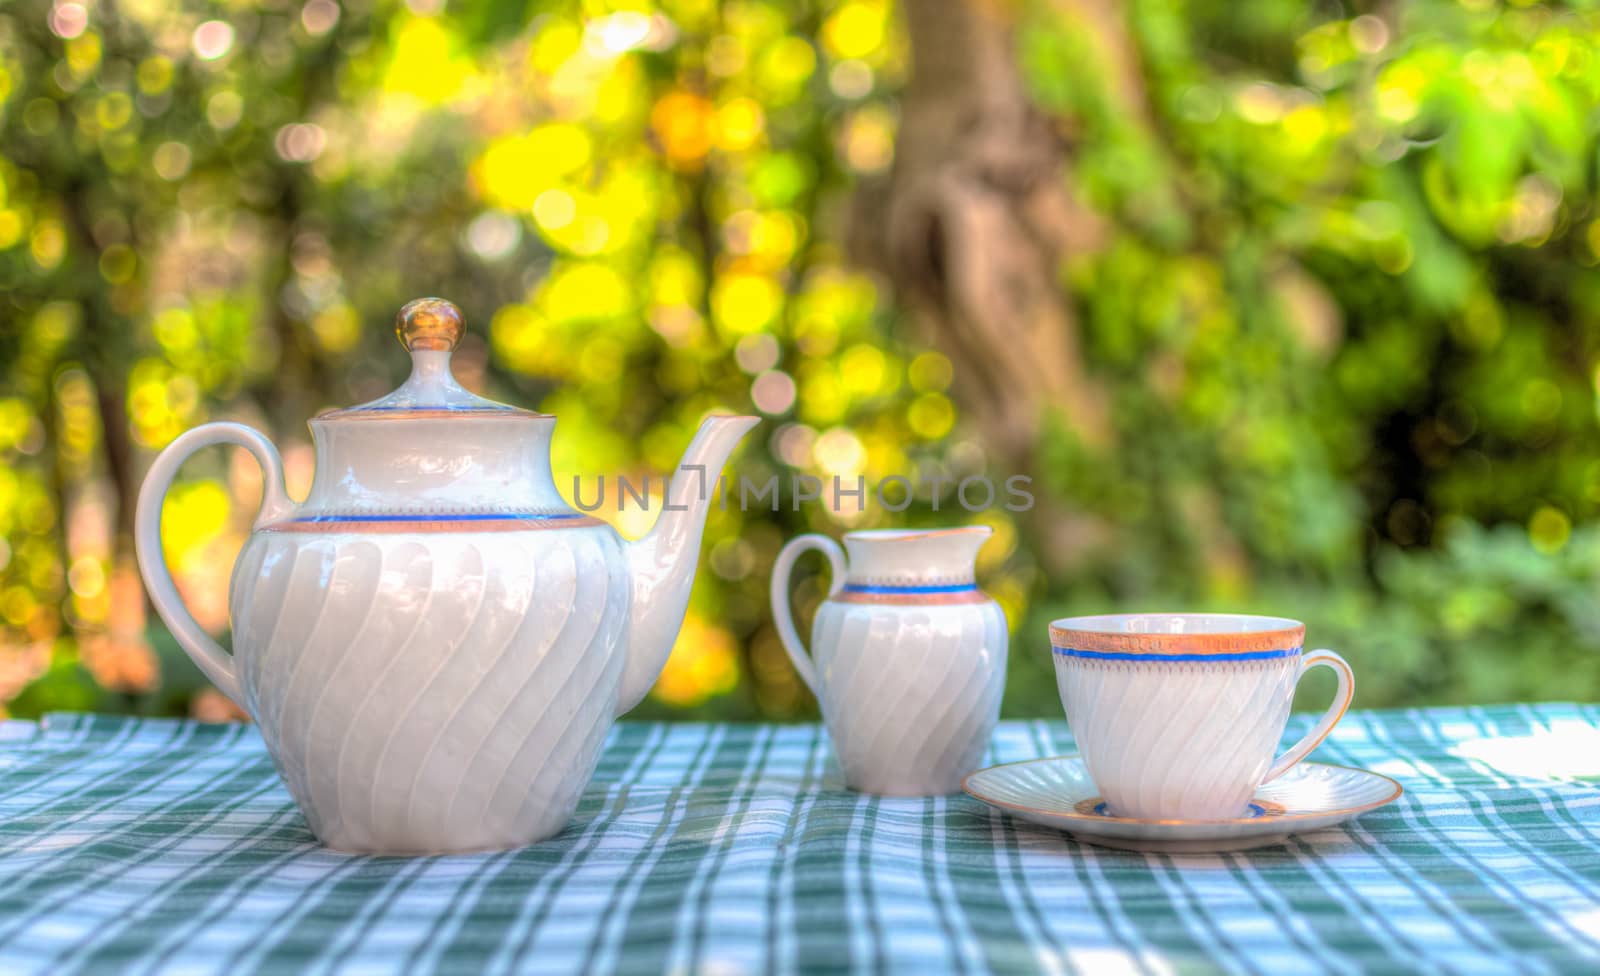 breakfast in the garden with a tea set on the table